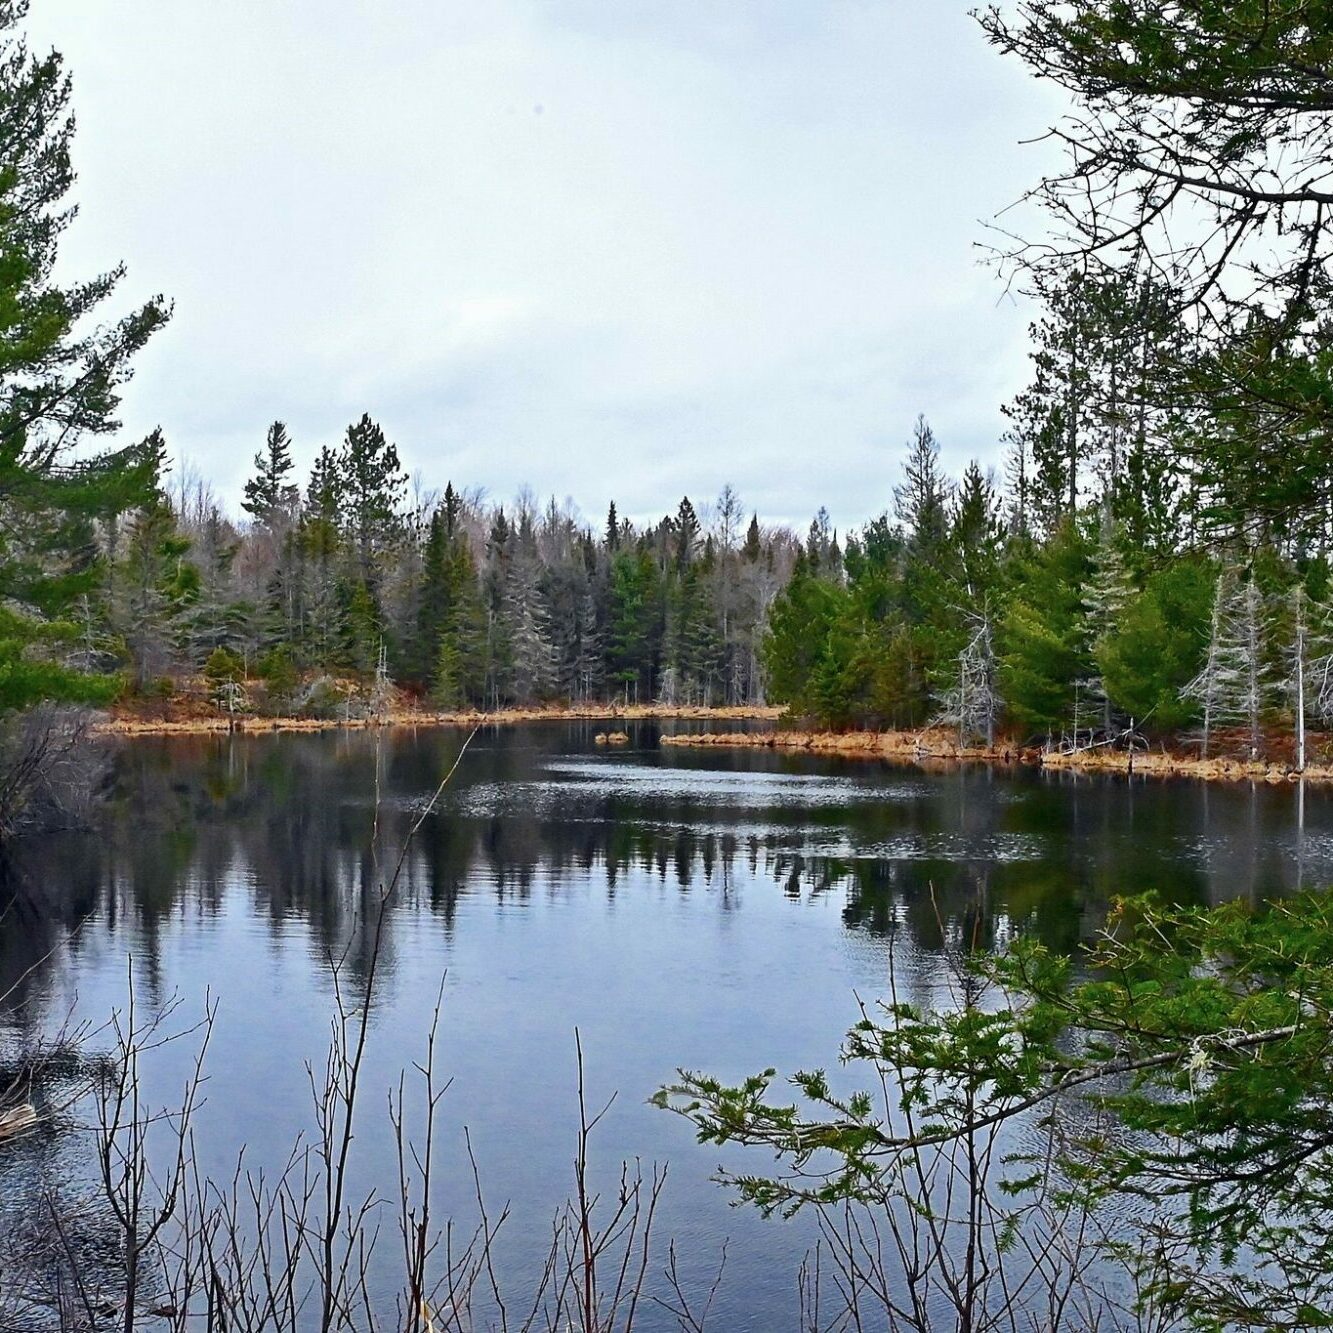 Tranquil forest lake surrounded by evergreen trees.